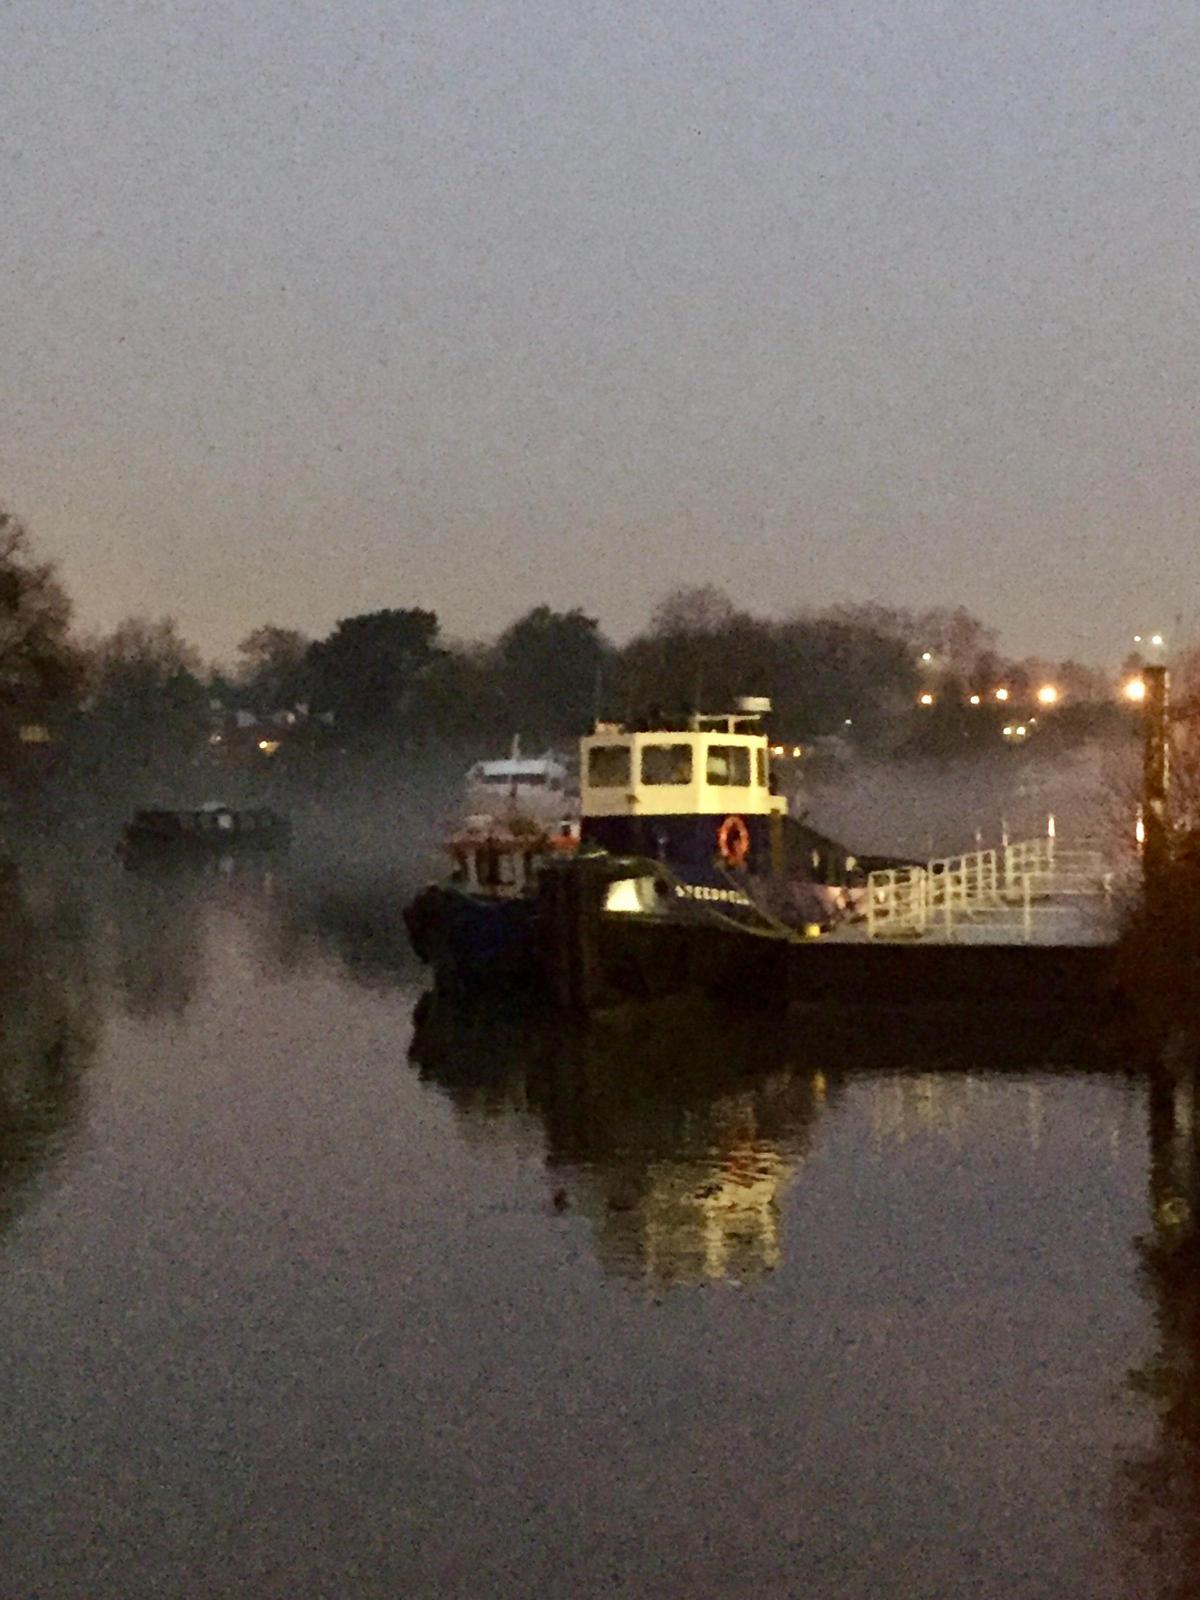 Nicola Bolam-Brown took this photo of the mist over the Thames in Richmond.